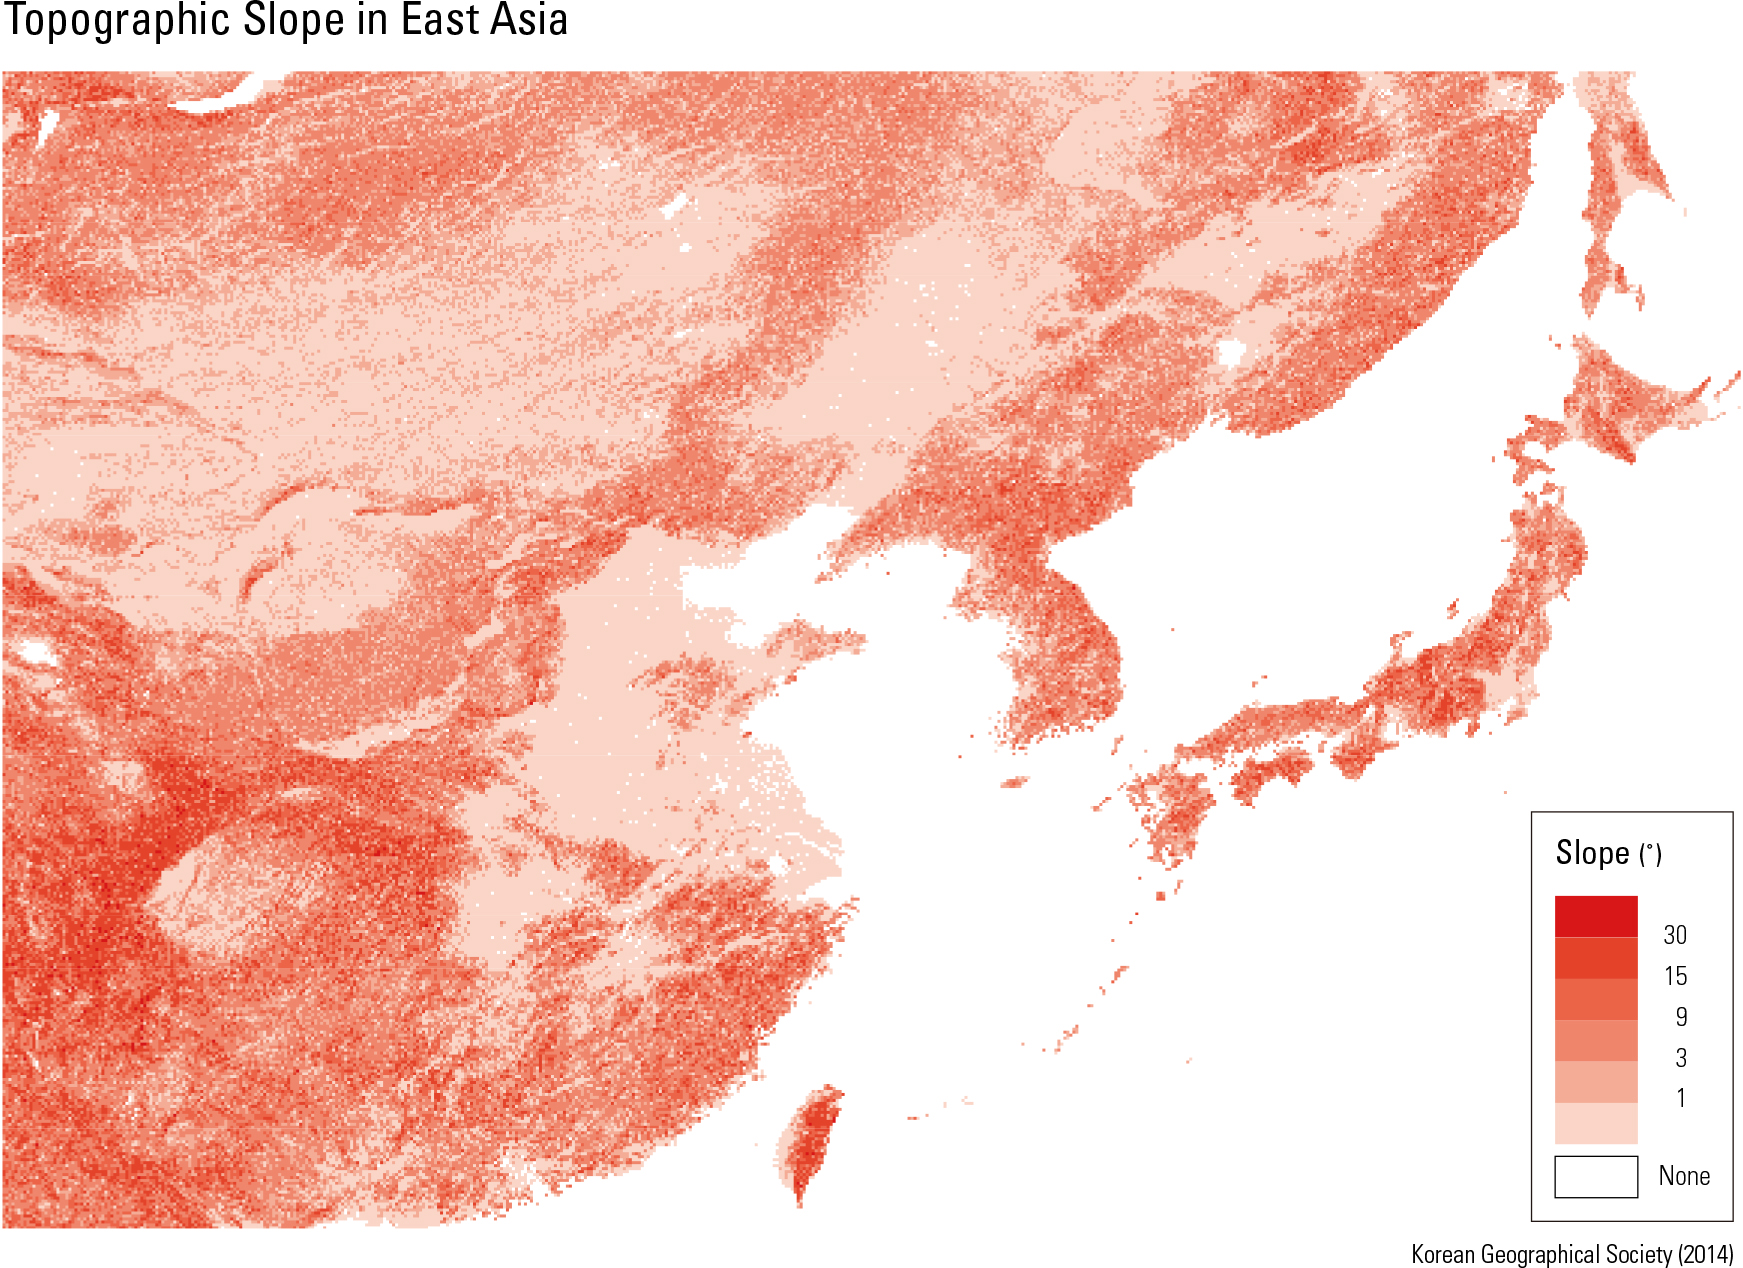 Topographic Slope in East Asia